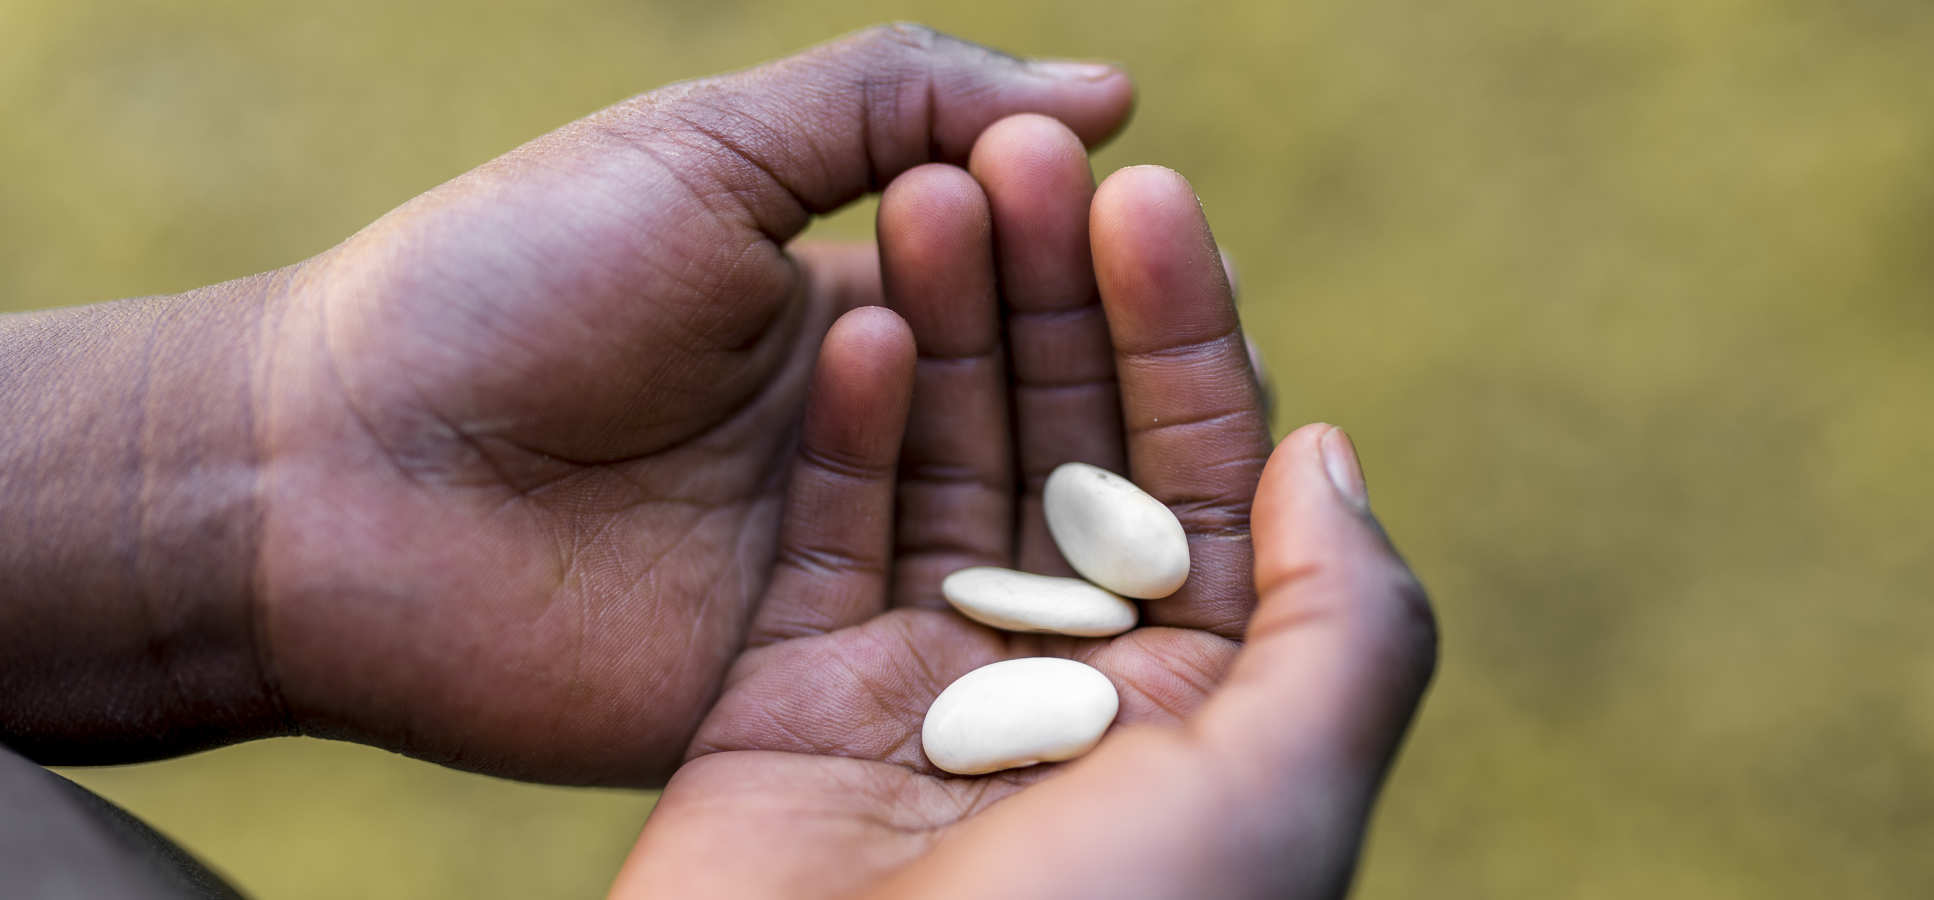 Child's hands holding dried beans